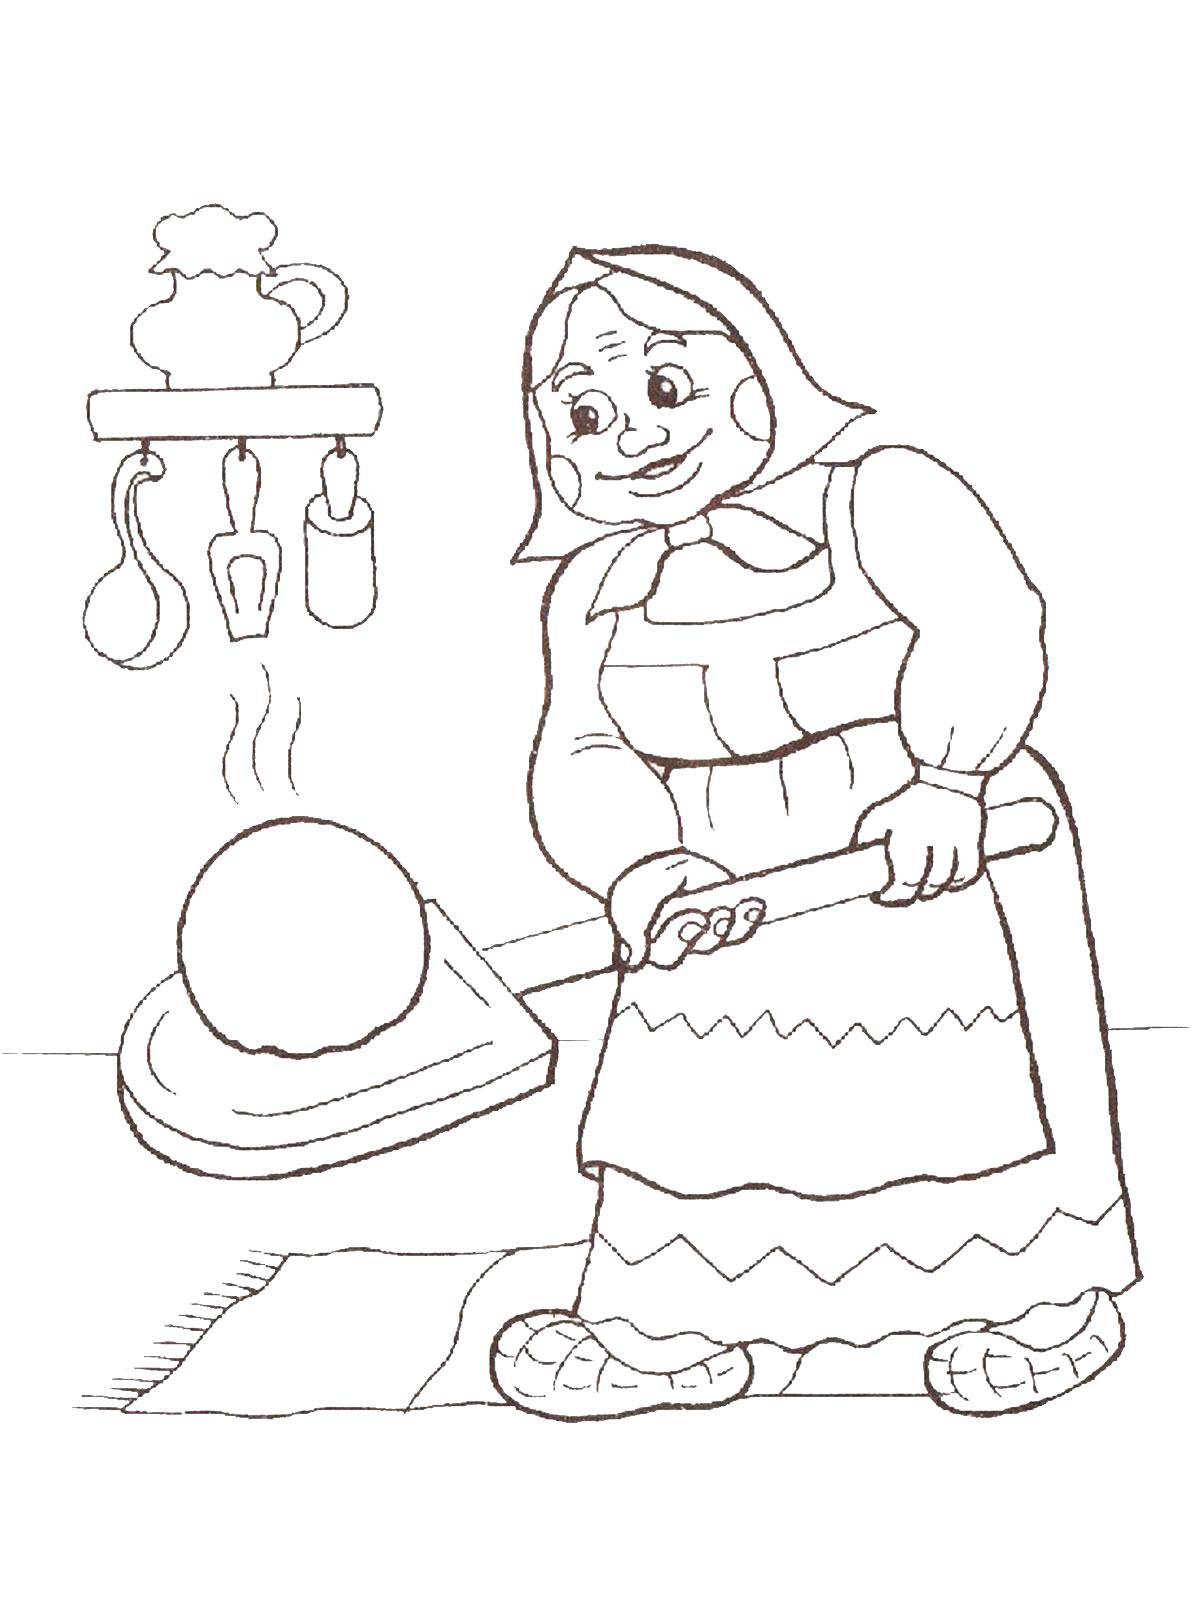 Coloring Grandma baked bun. Category The characters from fairy tales. Tags:  Fairy Tales, Gingerbread Man.